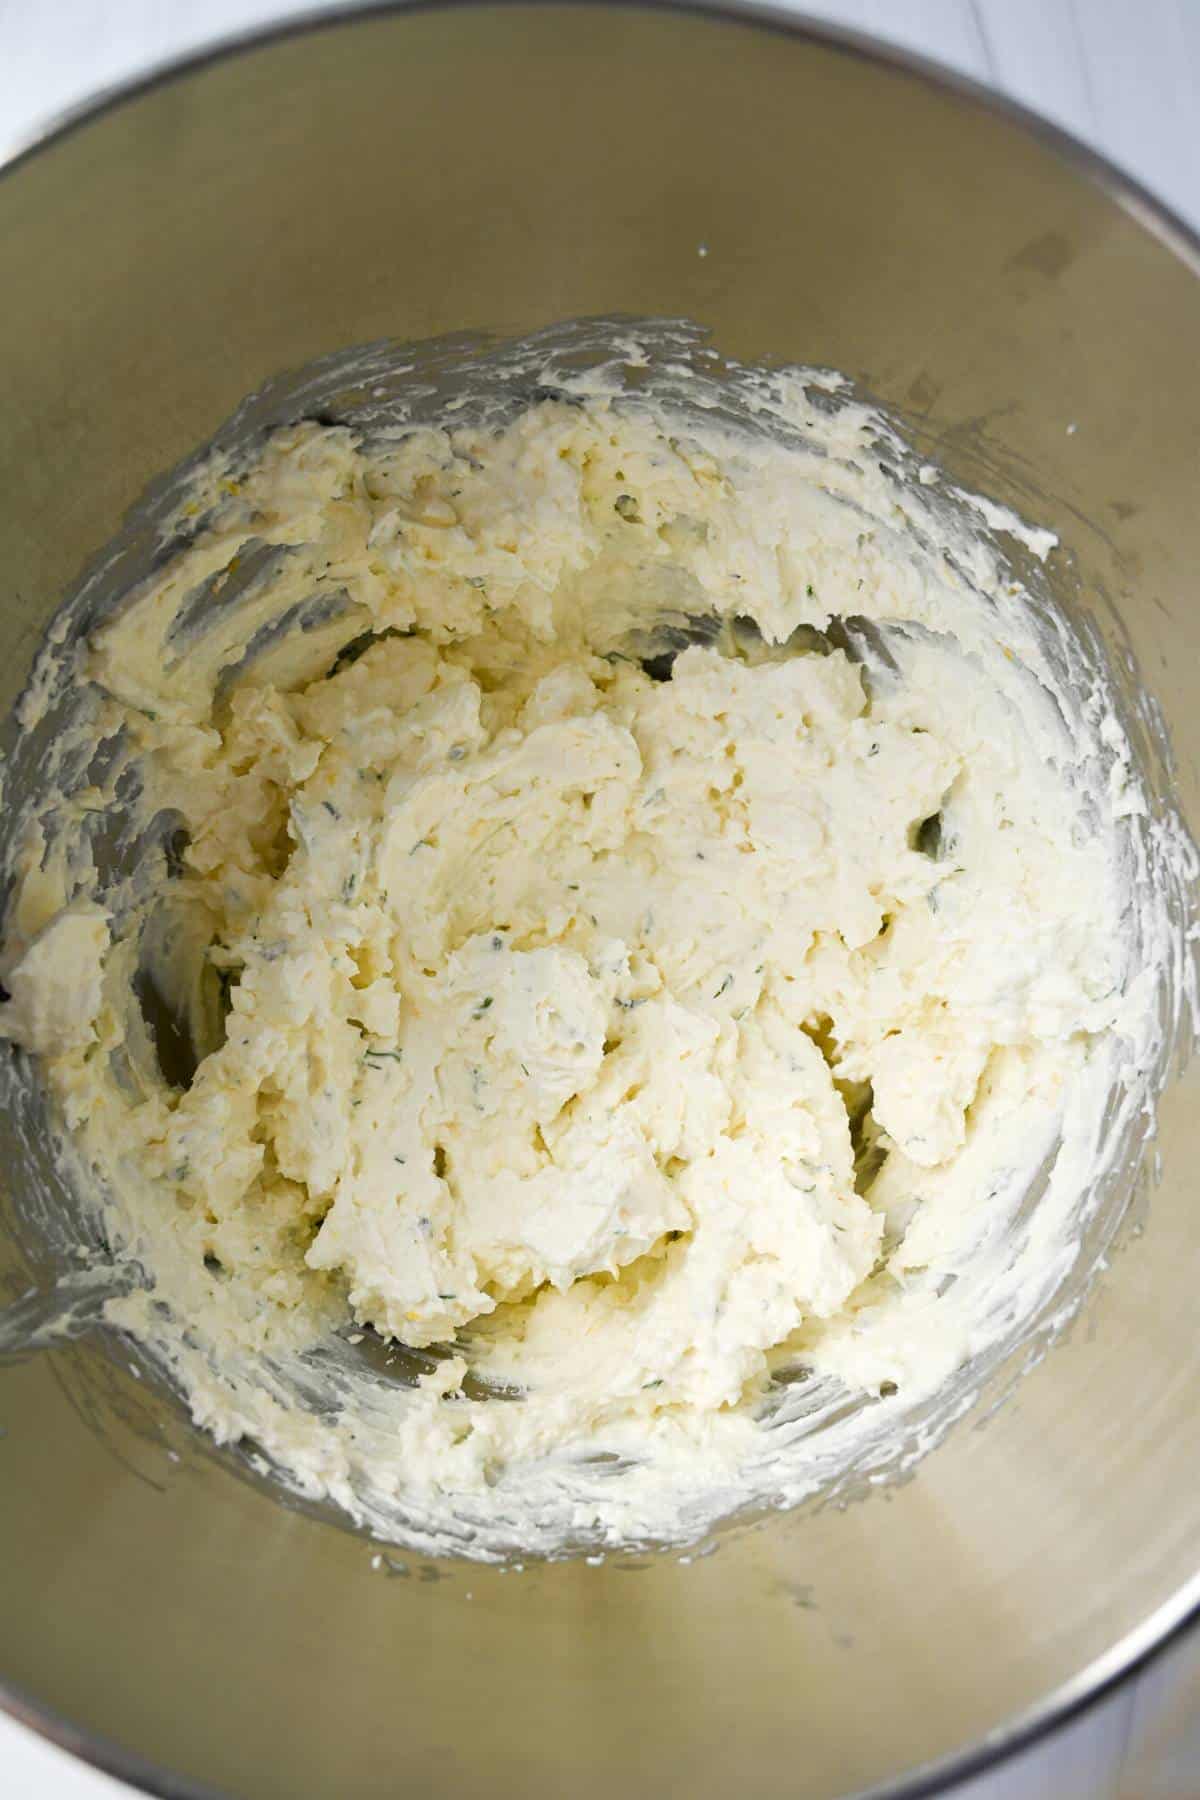 feta dip whipped in a stainless steel bowl